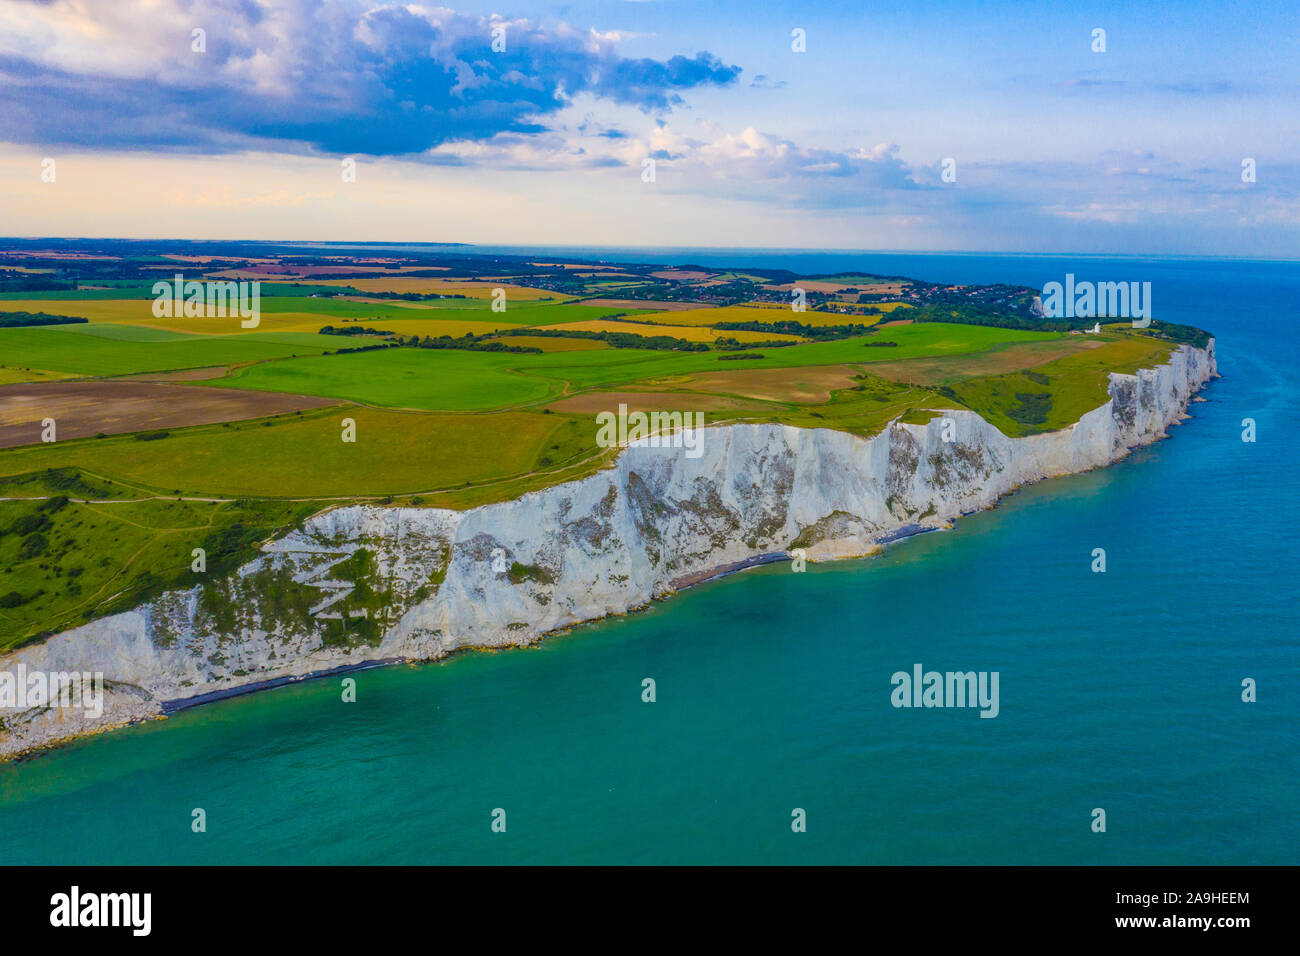 White Cliffs of Dover, English Channel, England, United KIngdom, Great Britain, National Trust lands near Dover, National Trust lands near Dover, Stock Photo